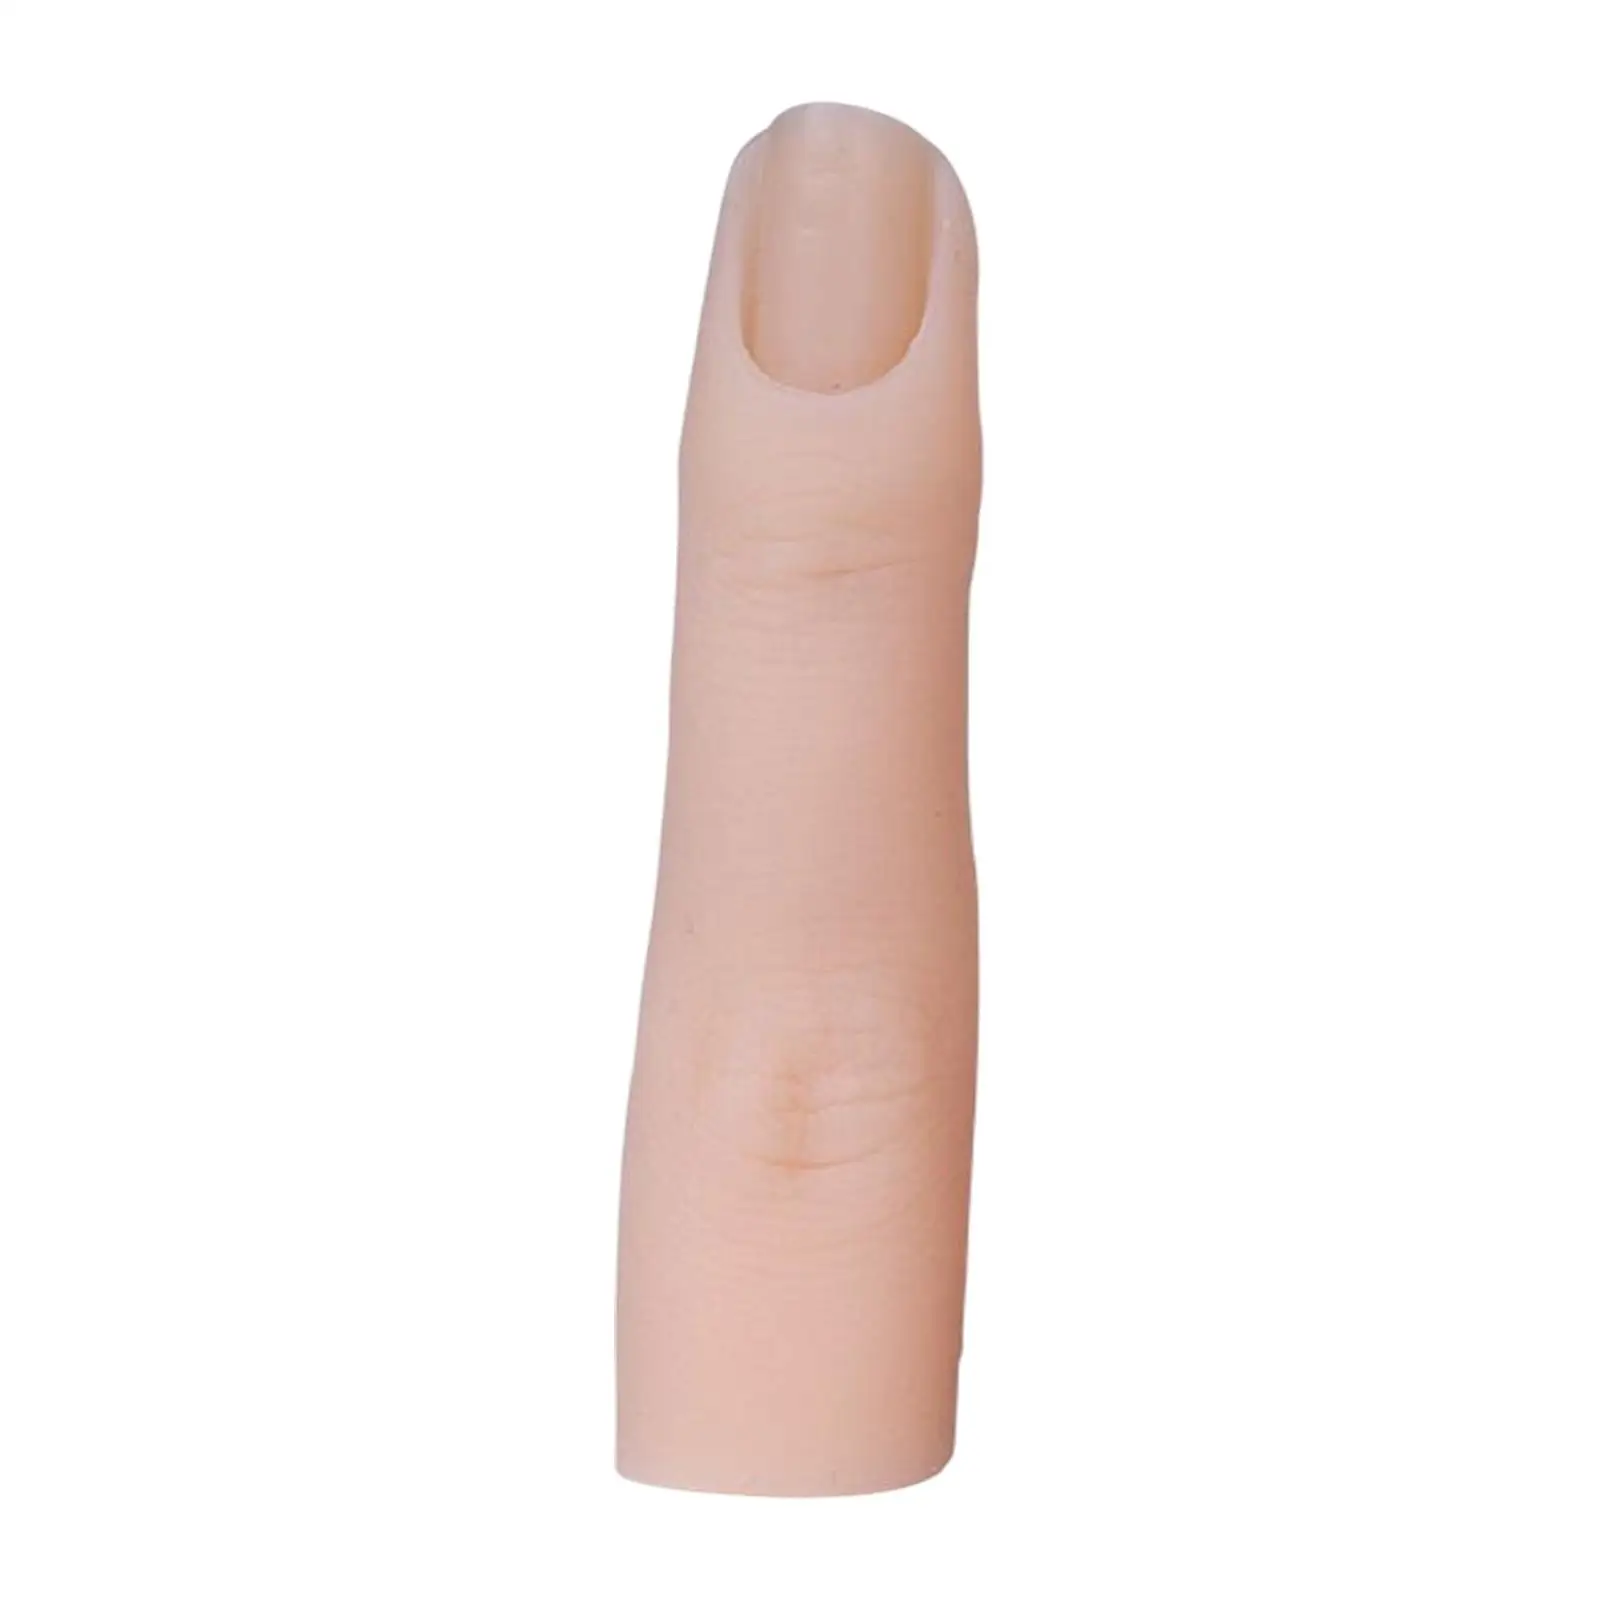 Nail finger Fake Finger with Joints False Nail Training Accesories for Beginners Women